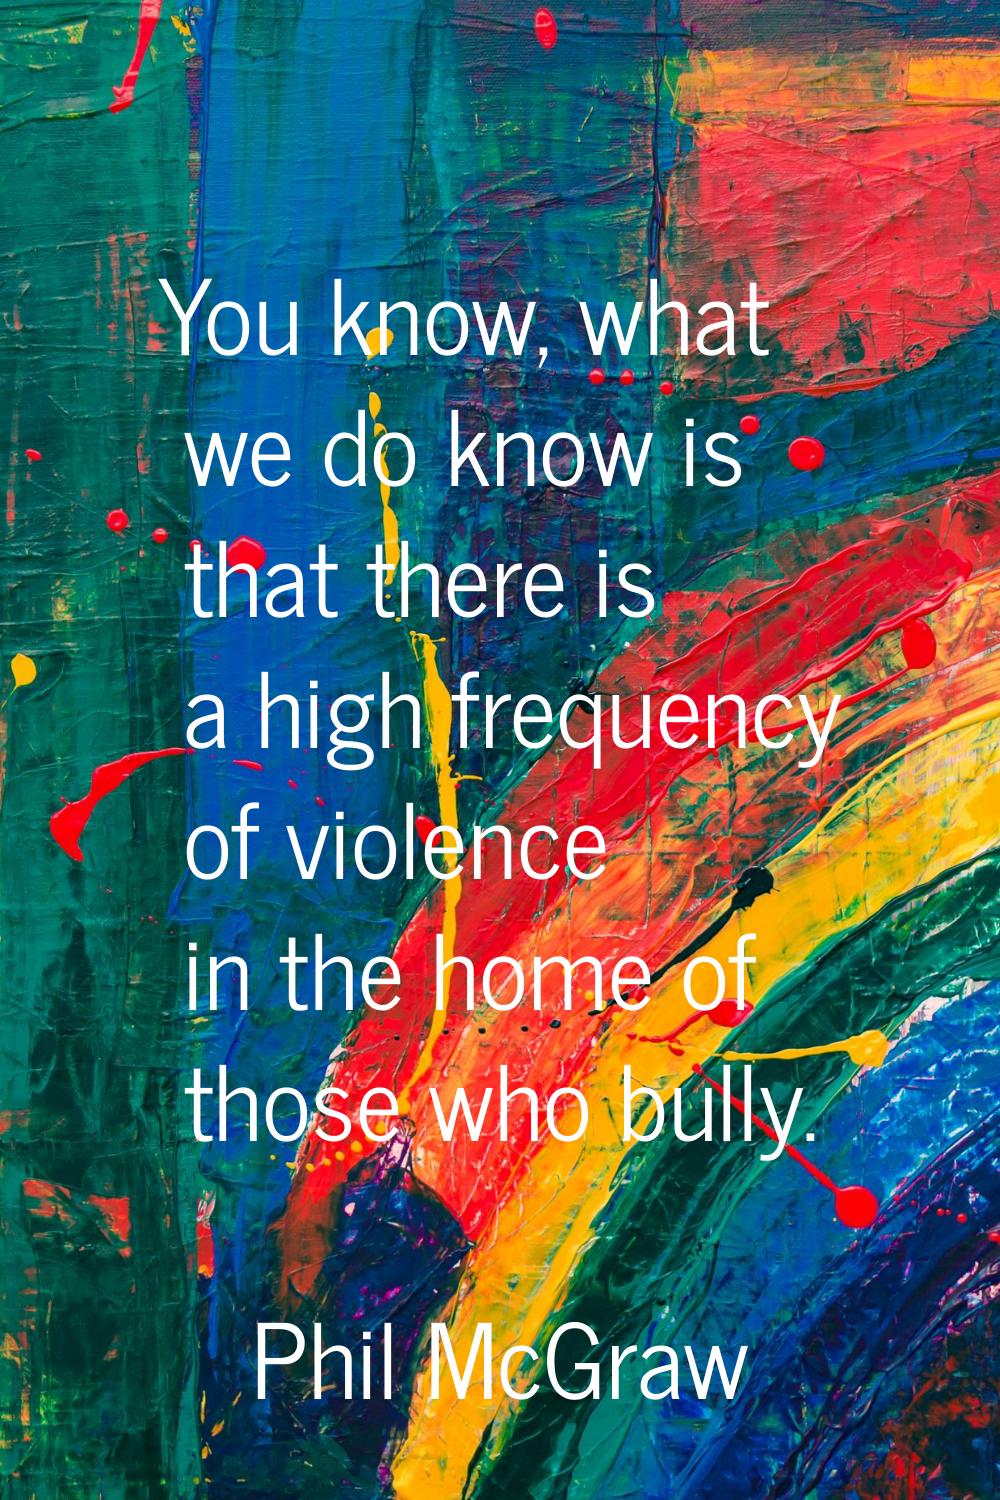 You know, what we do know is that there is a high frequency of violence in the home of those who bu